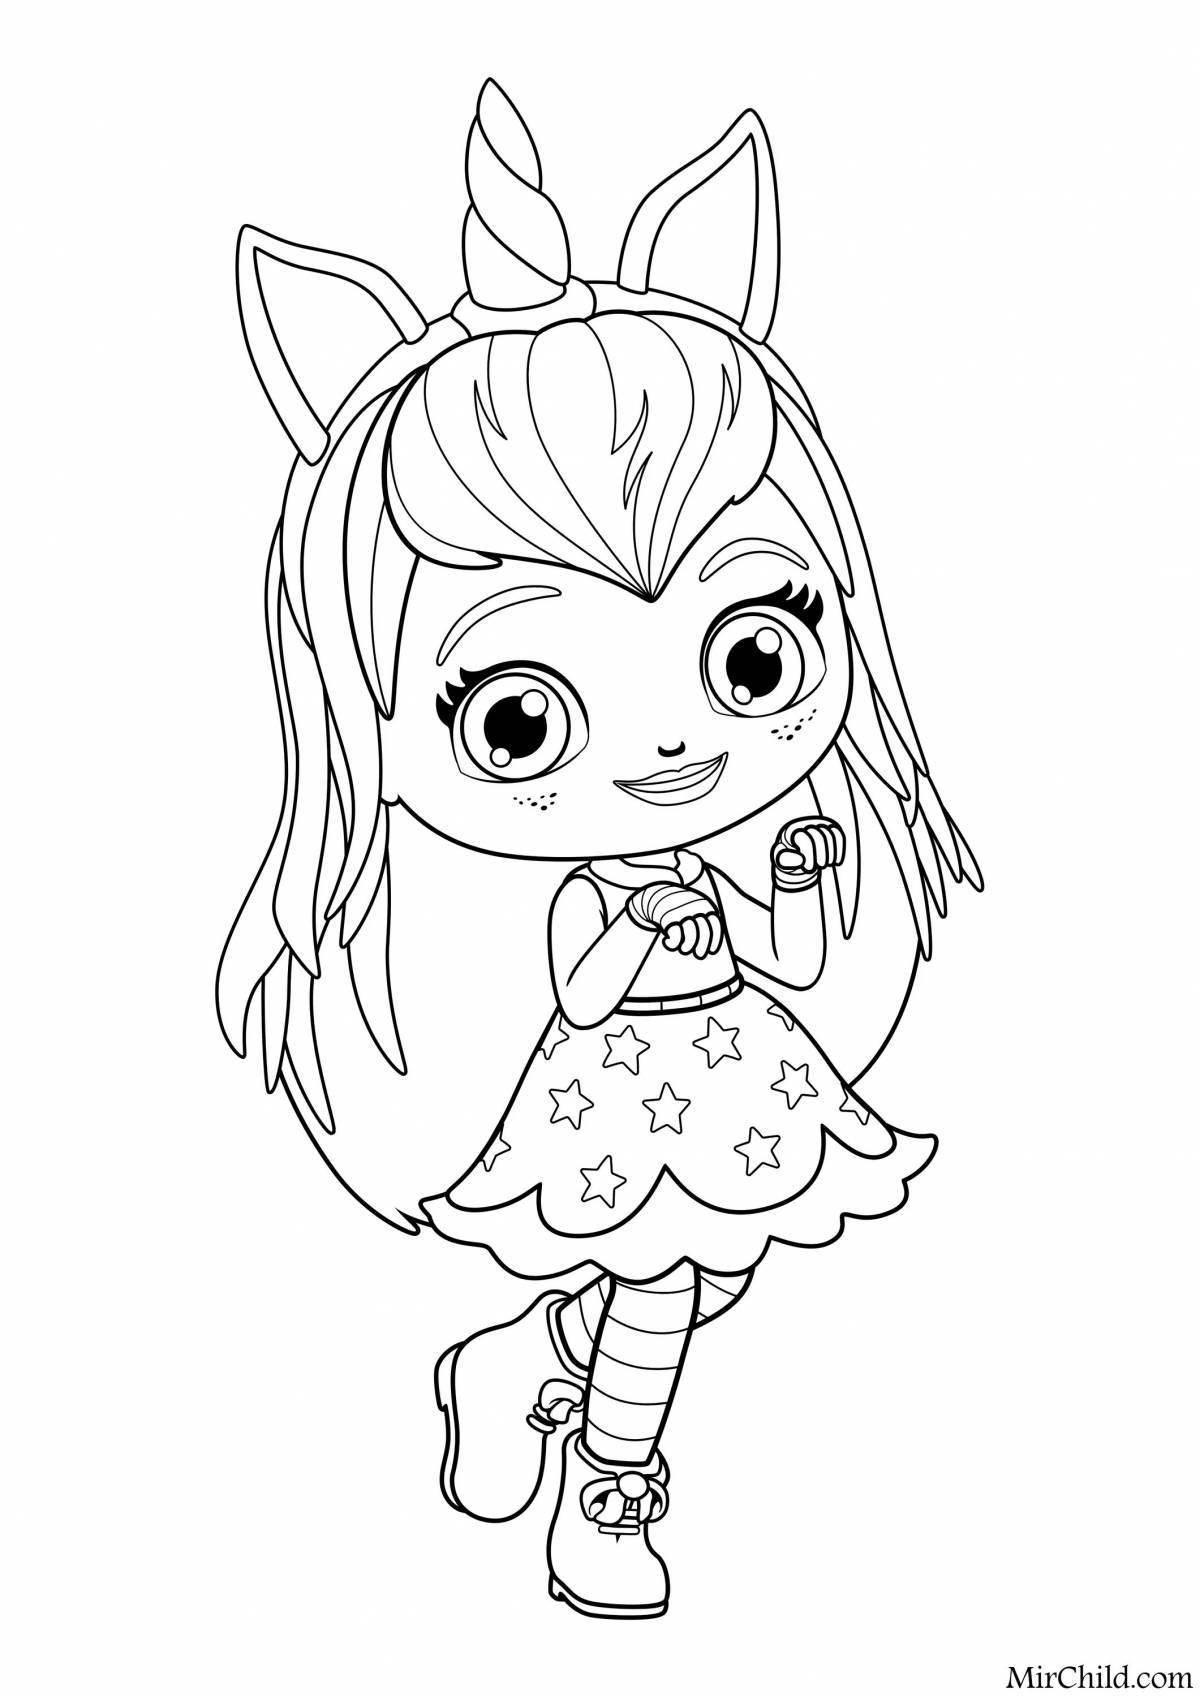 Huggable coloring page bunny doll